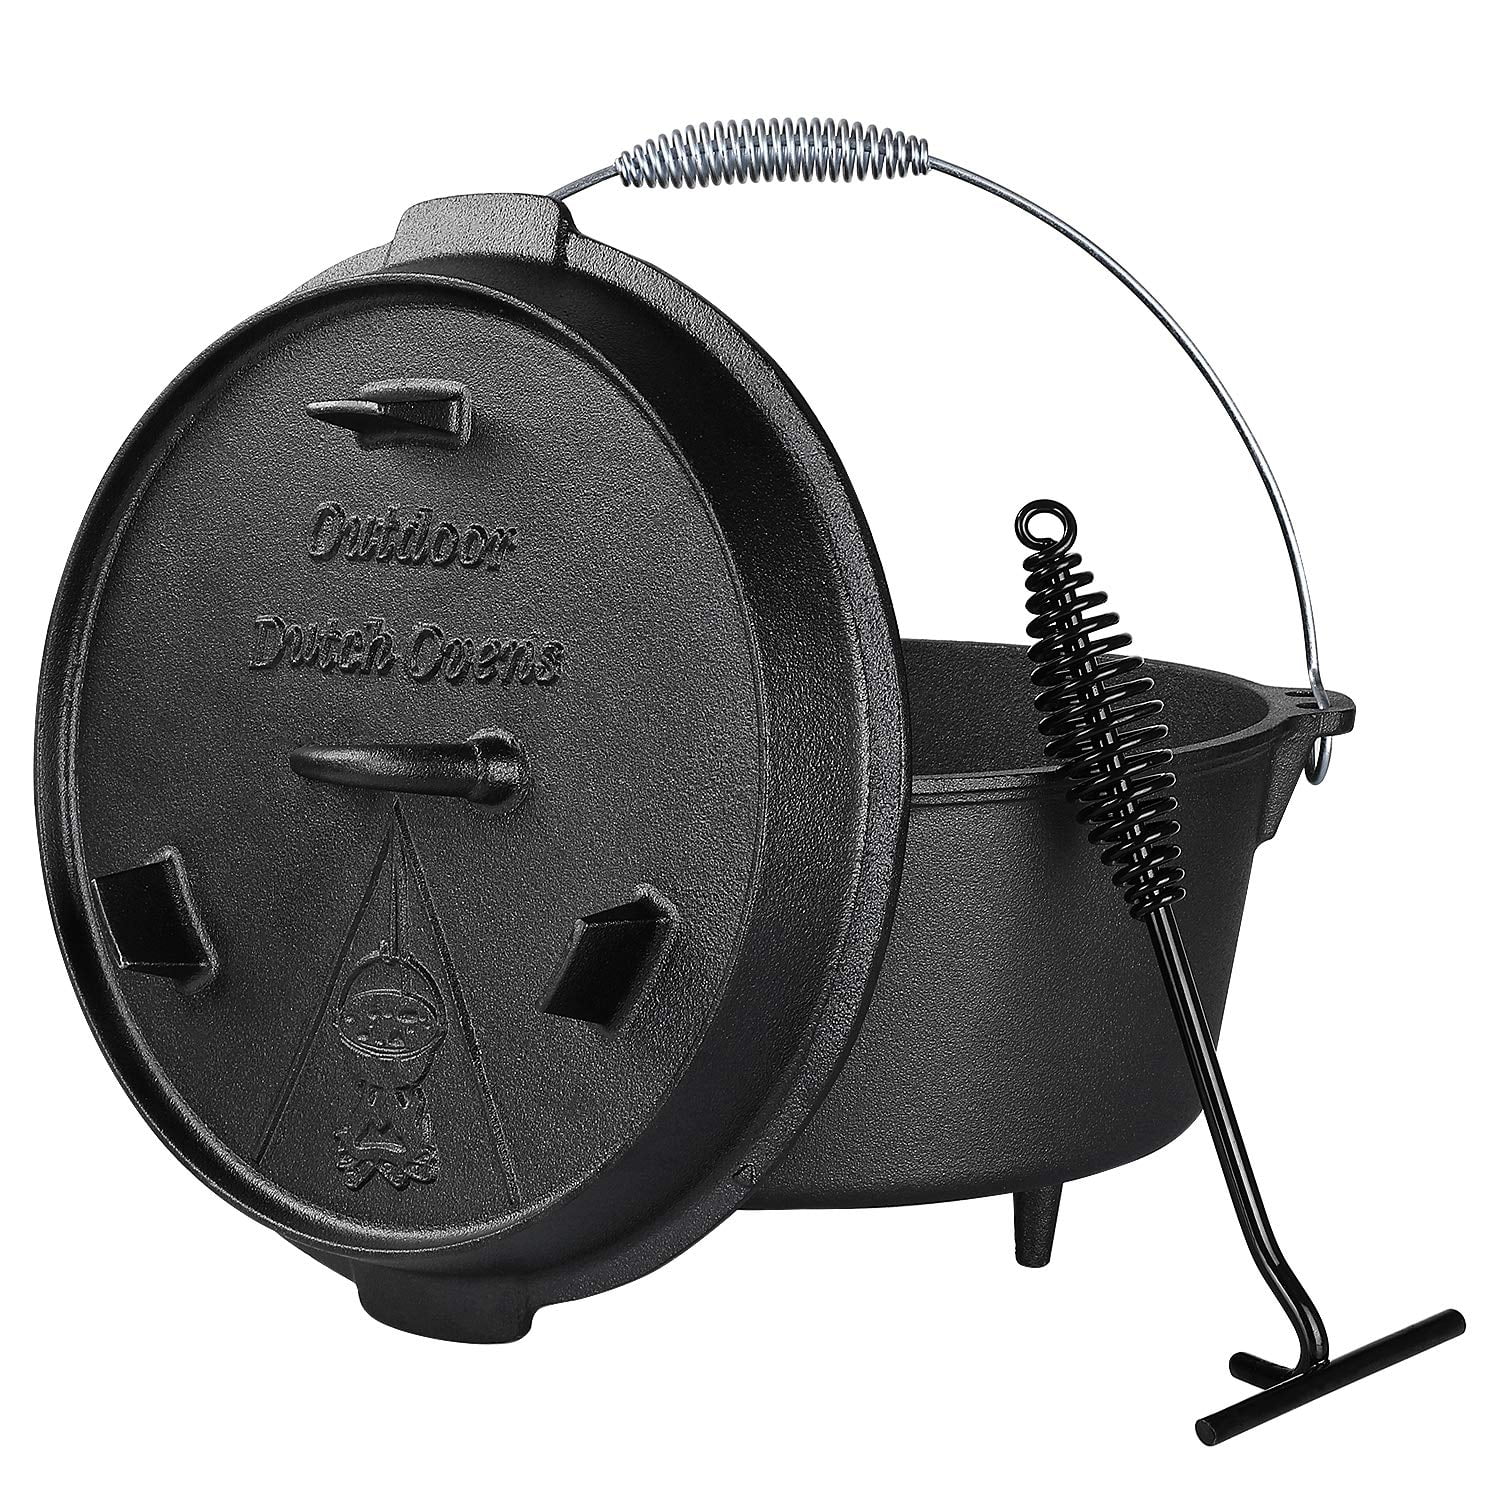 Westinghouse Cast Iron 3qt Dutch Oven with 10.2 Skillet Lid Long Handle, 2  PIECES IN A BOX - Harris Teeter